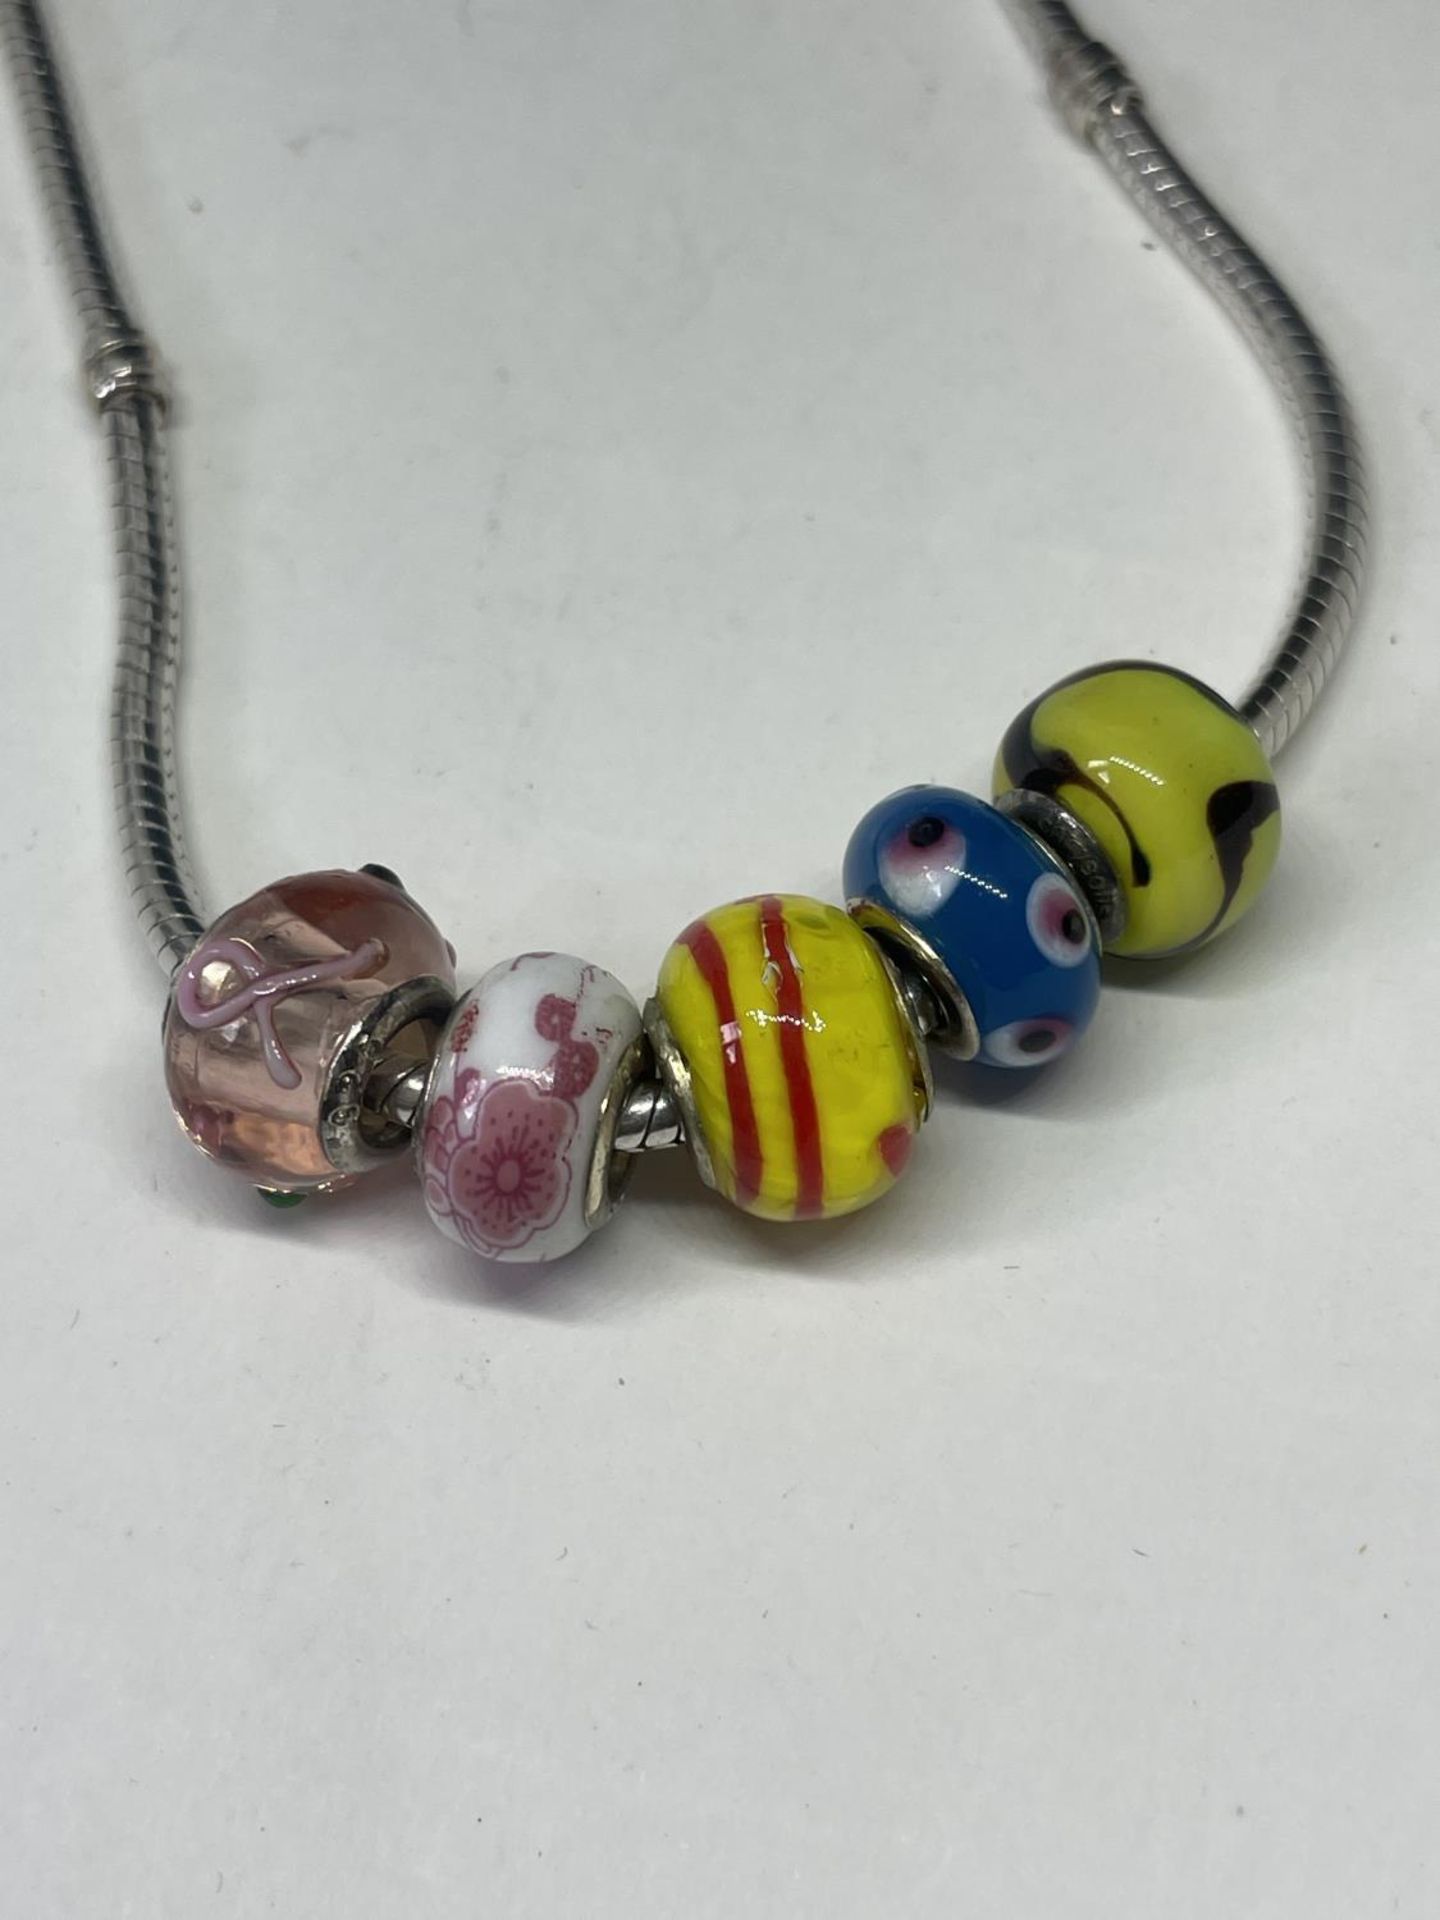 A SILVER PANDORA NECKLACE WITH FIVE GLASS CHARMS - Image 2 of 3